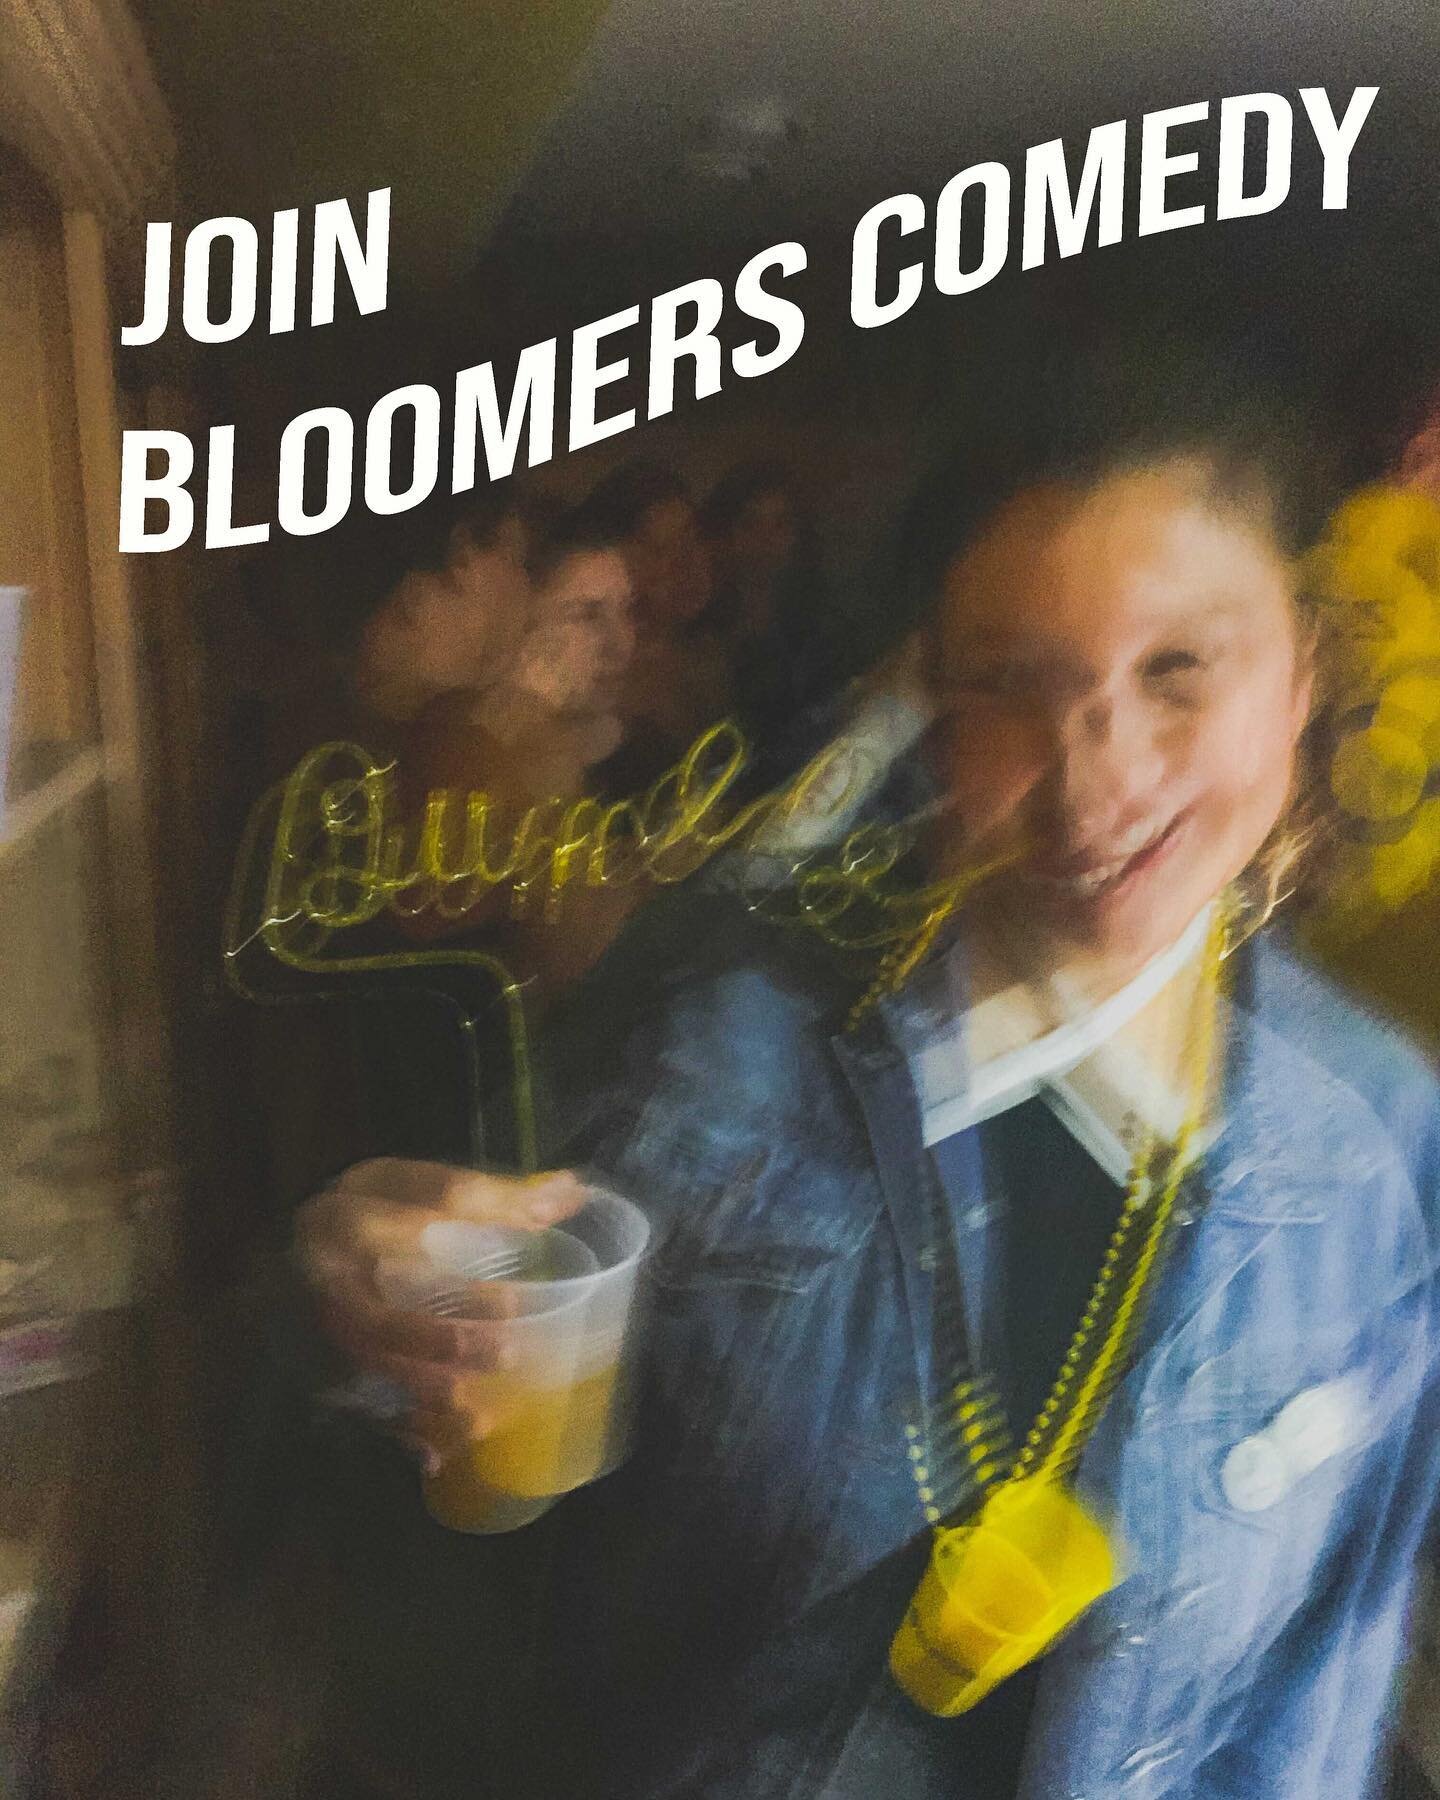 Once again, we are asking you to audition for Bloomers Comedy. (Bernie would approve)